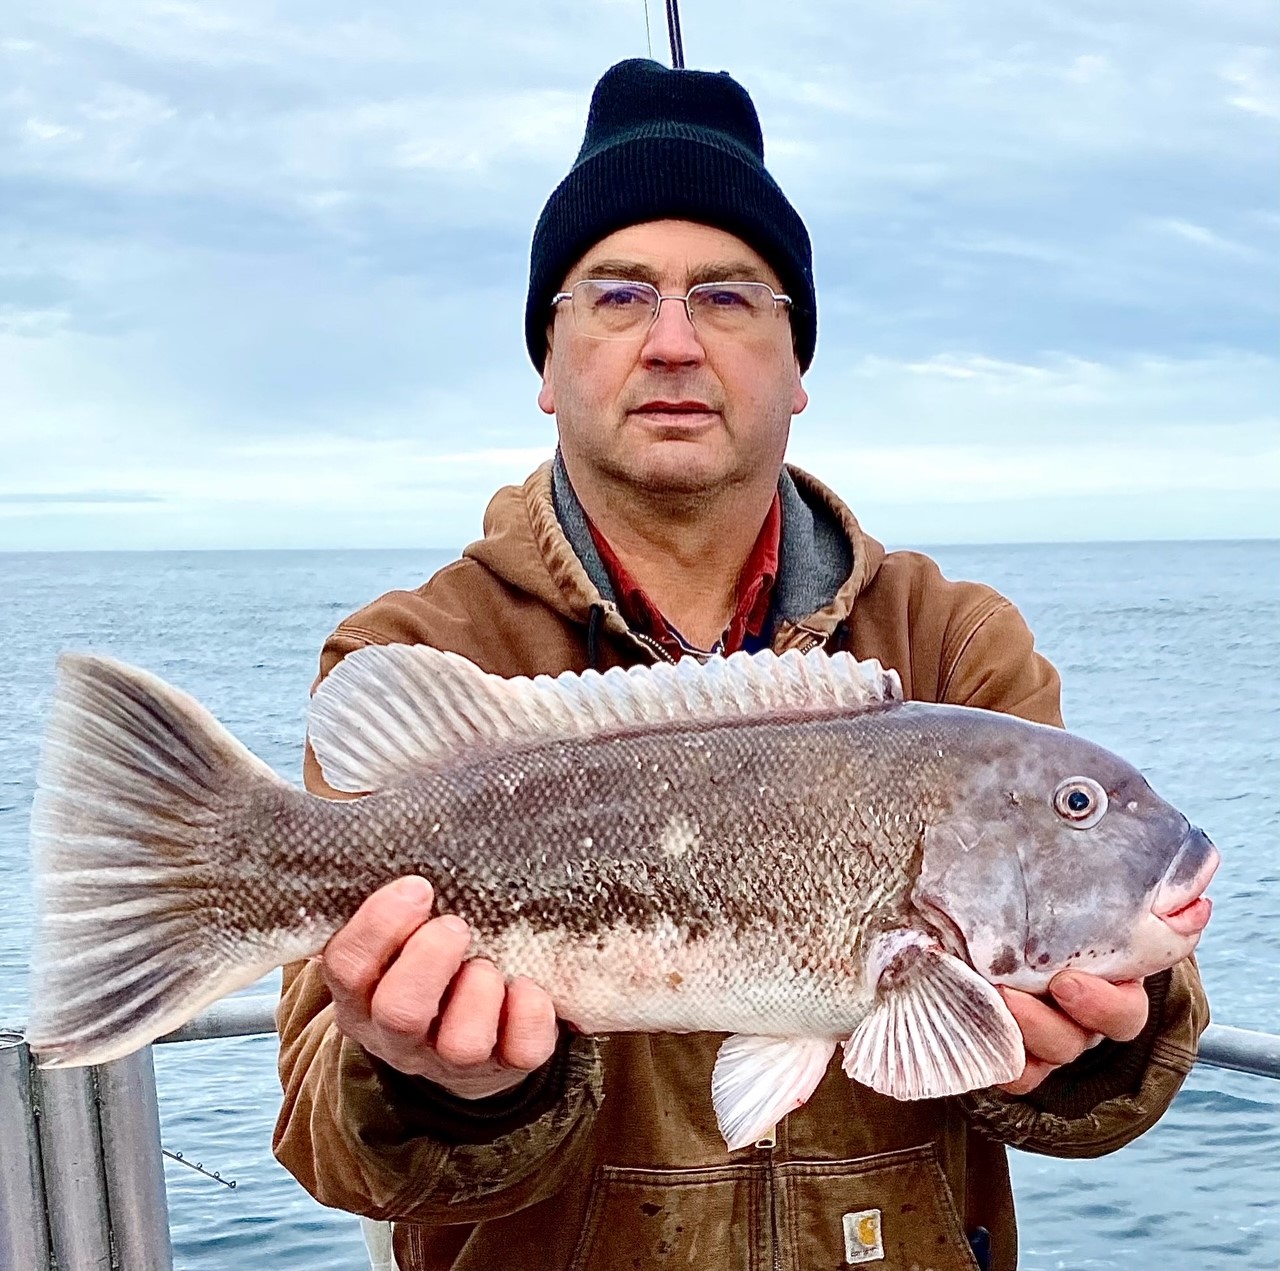 Tautog – Or Lack There Of